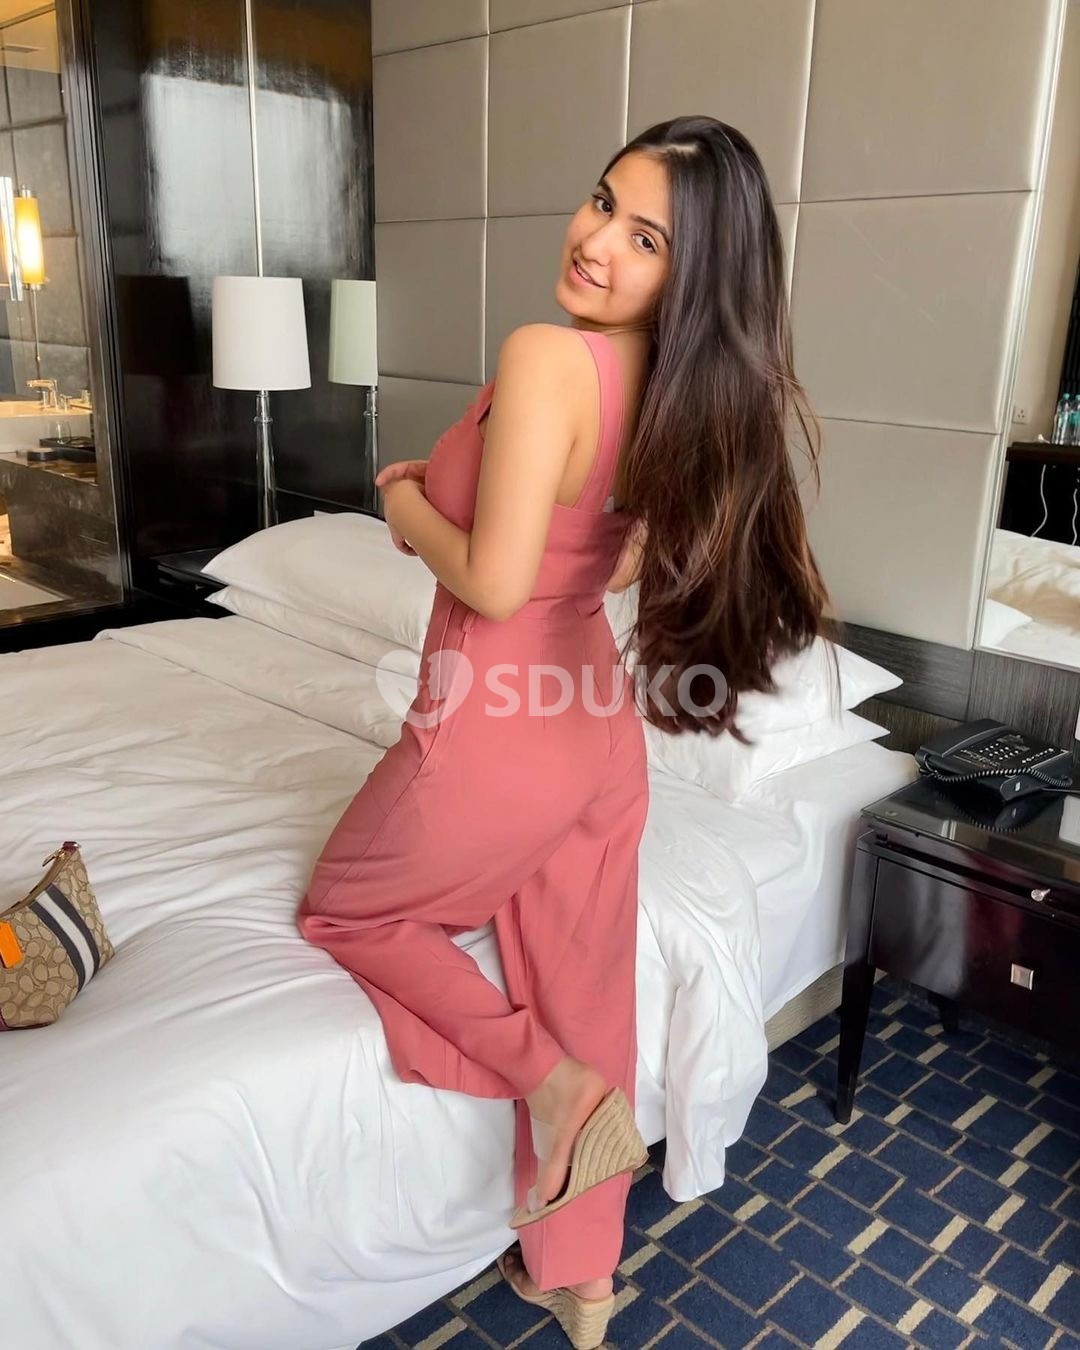 MG road  bangalore   ✅ 24x7 AFFORDABLE CHEAPEST RATE SAFE CALL GIRL SERVICE AVAILABLE OUTCALL AVAILABLE..